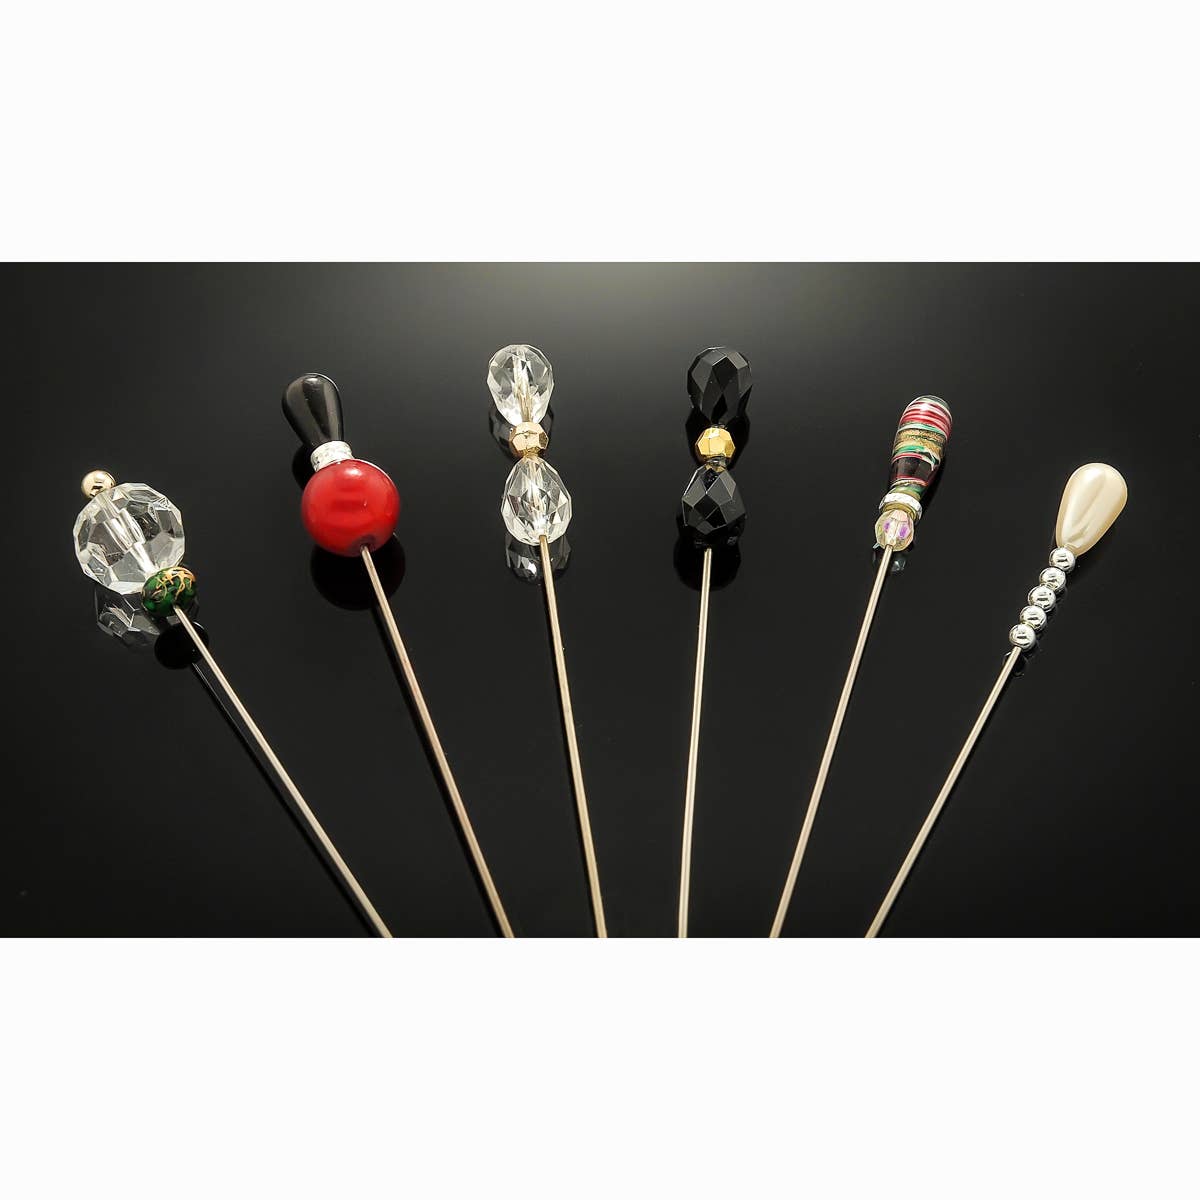 A4000-021 6 Pieces 5'' Assorted Colors Beads Hat Pin Set